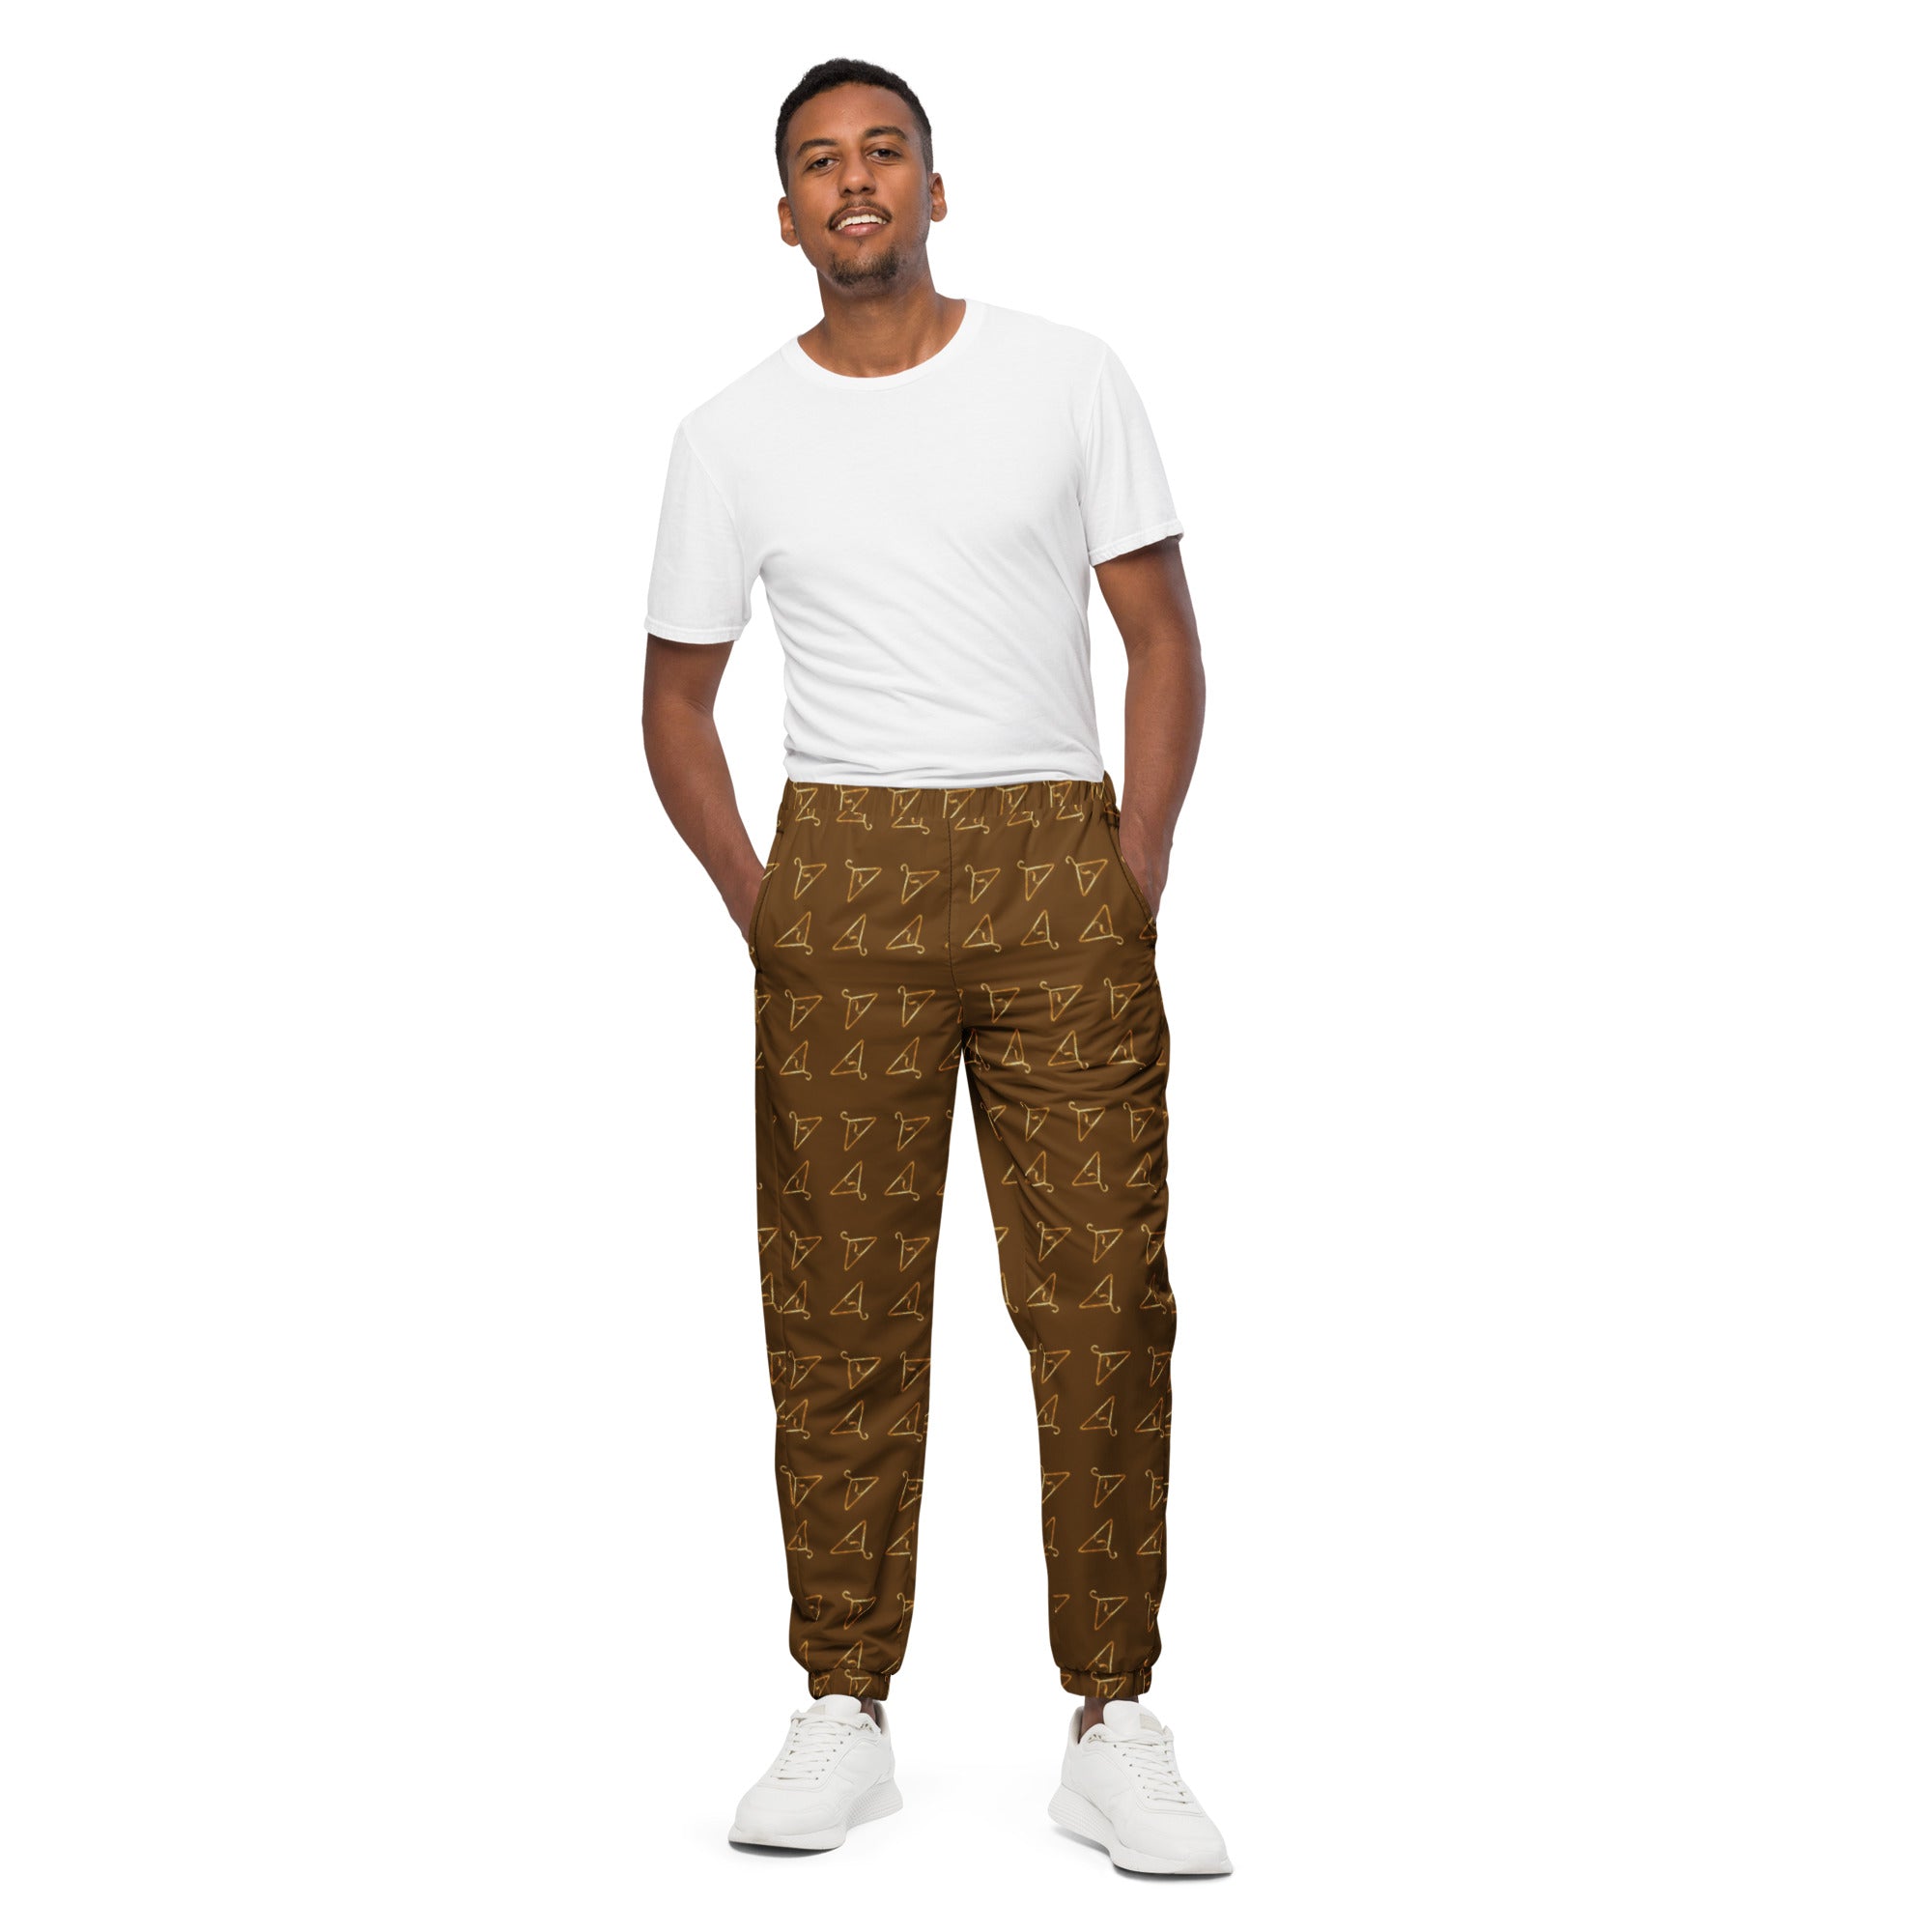 All Day Wear Pant | Track Pants – Mesmerro